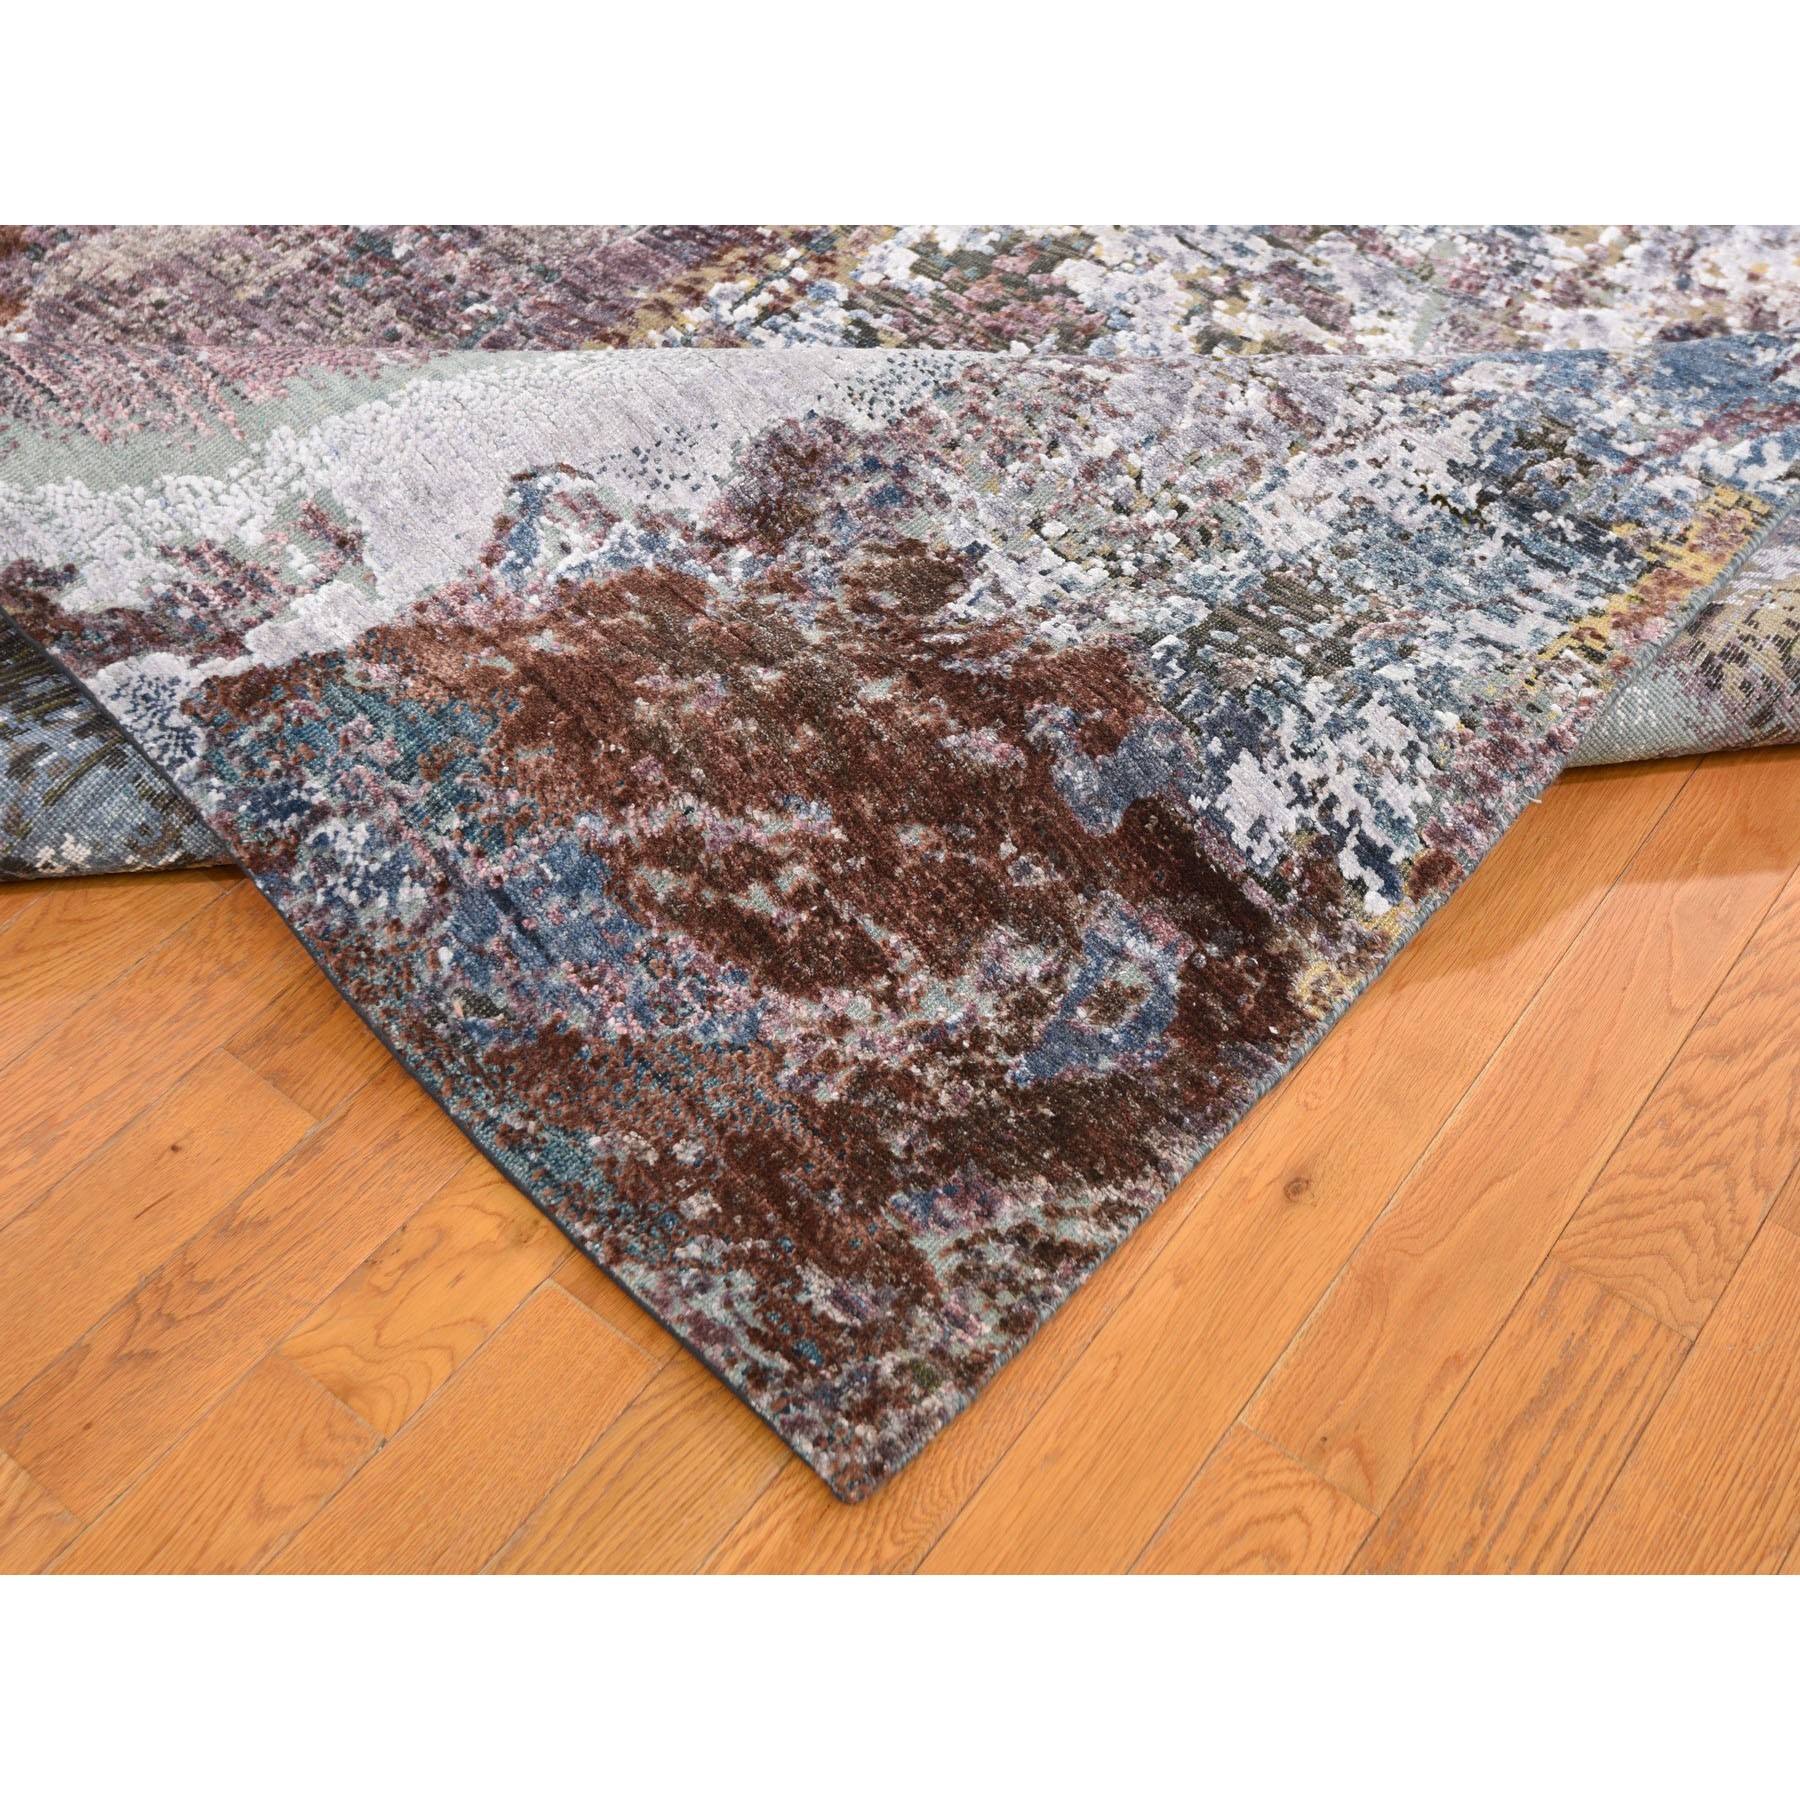 8-9 x12- Colorful Abstract of Painter-s Palette Silk With Textured Wool Hand Knotted Oriental Rug 